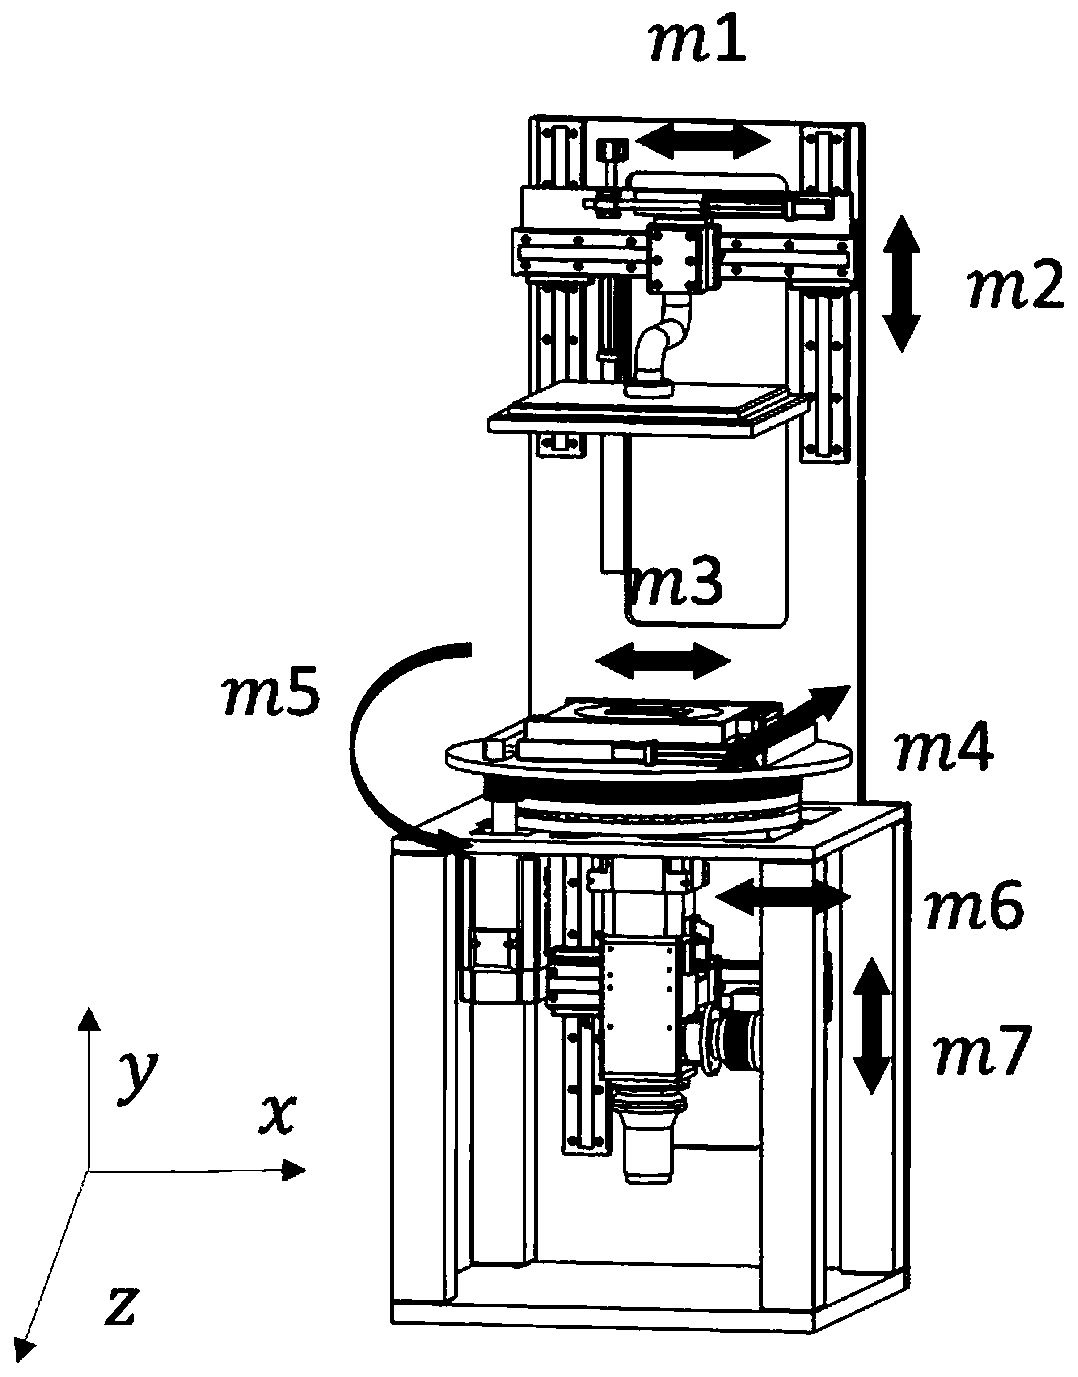 A cl imaging system and analysis method of orthogonal linear scanning